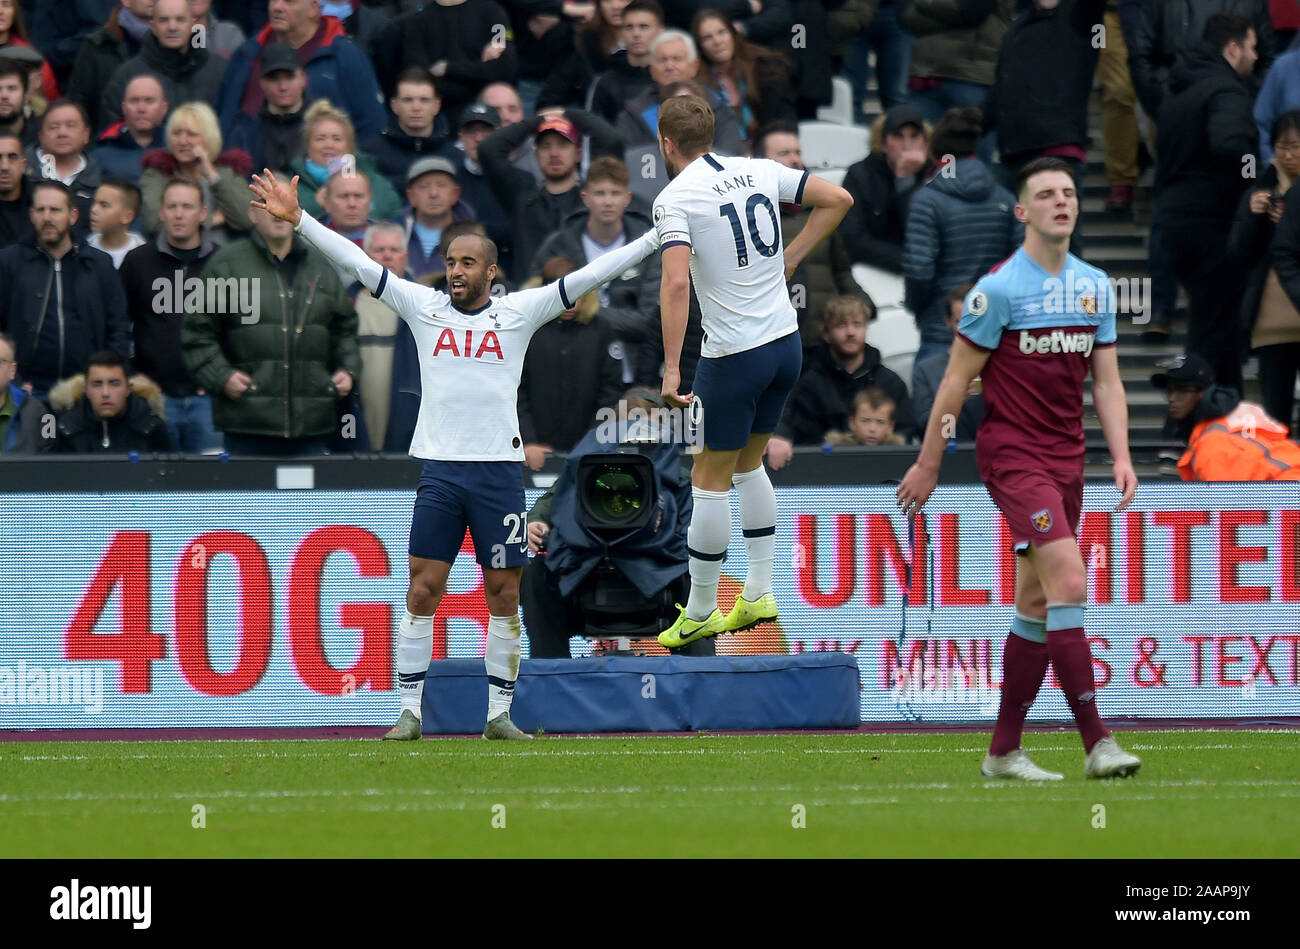 London Stadium, 23rd November 2019.GOAL Lucas Moura of Tottenham Hotspur celebrates the second goal with Harry Kane of during the West Ham vs Tottenham Hotspur Premier League match at the London Stadium  23rd November 2019 -EDITORIAL USE ONLY No use with unauthorised audio, video, data, fixture lists (outside the EU), club/league logos or 'live' services. Online in-match use limited to 45 images (+15 in extra time). No use to emulate moving images. No use in betting, games or single club/league/player publications/services- Credit: Martin Dalton/Alamy Live News Stock Photo